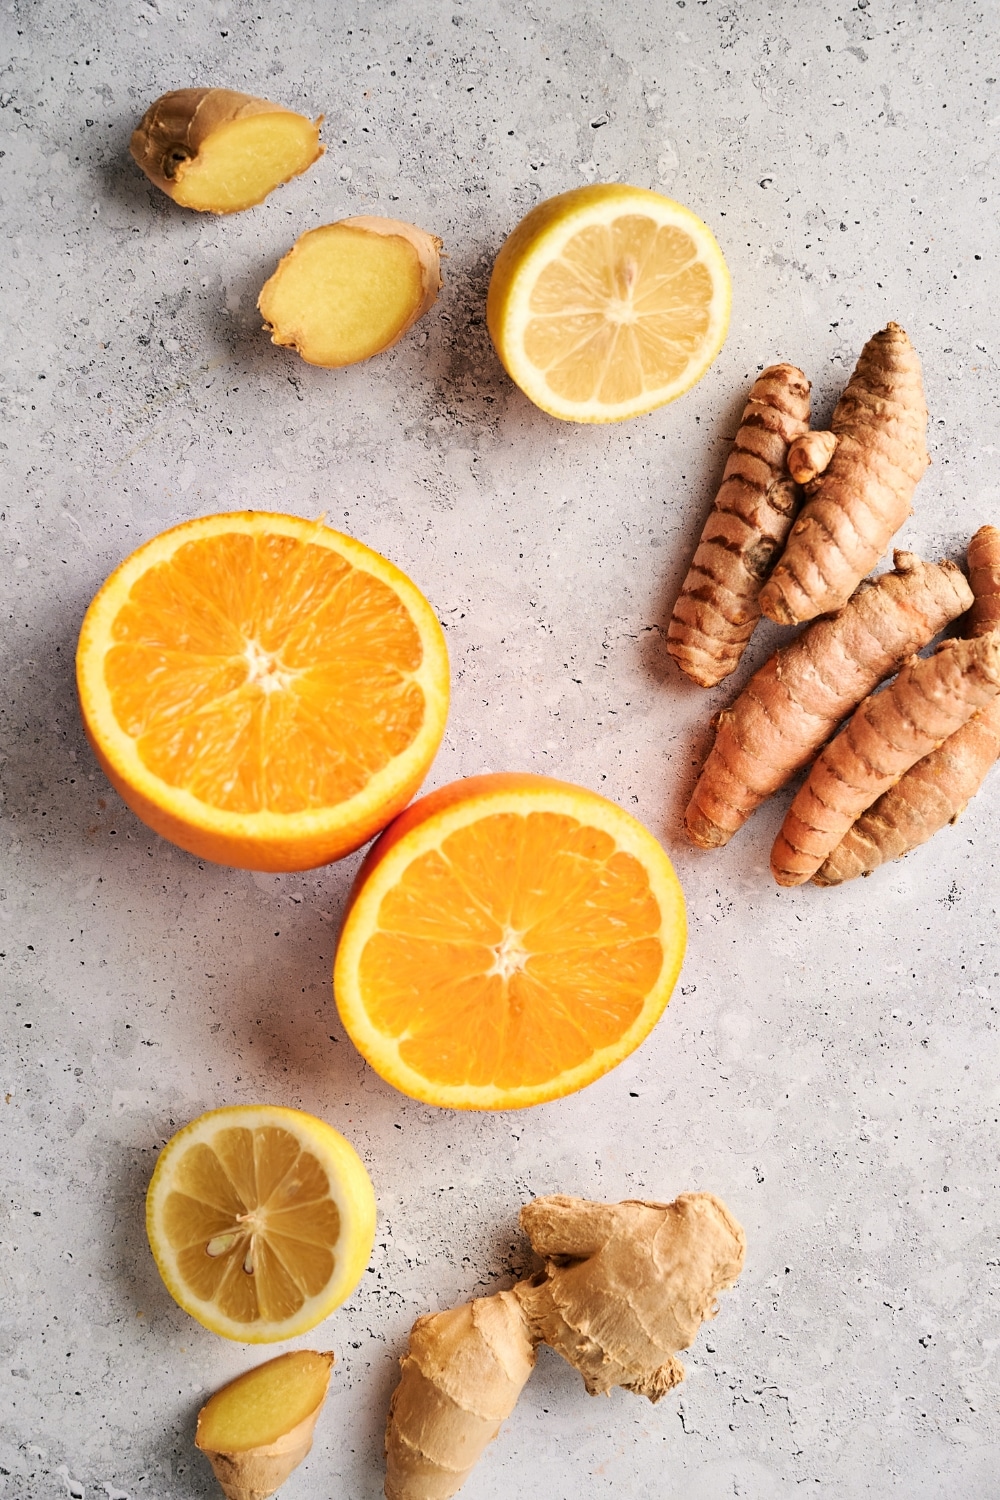 A countertop with an orange, lemon, ginger, and turmeric on it.